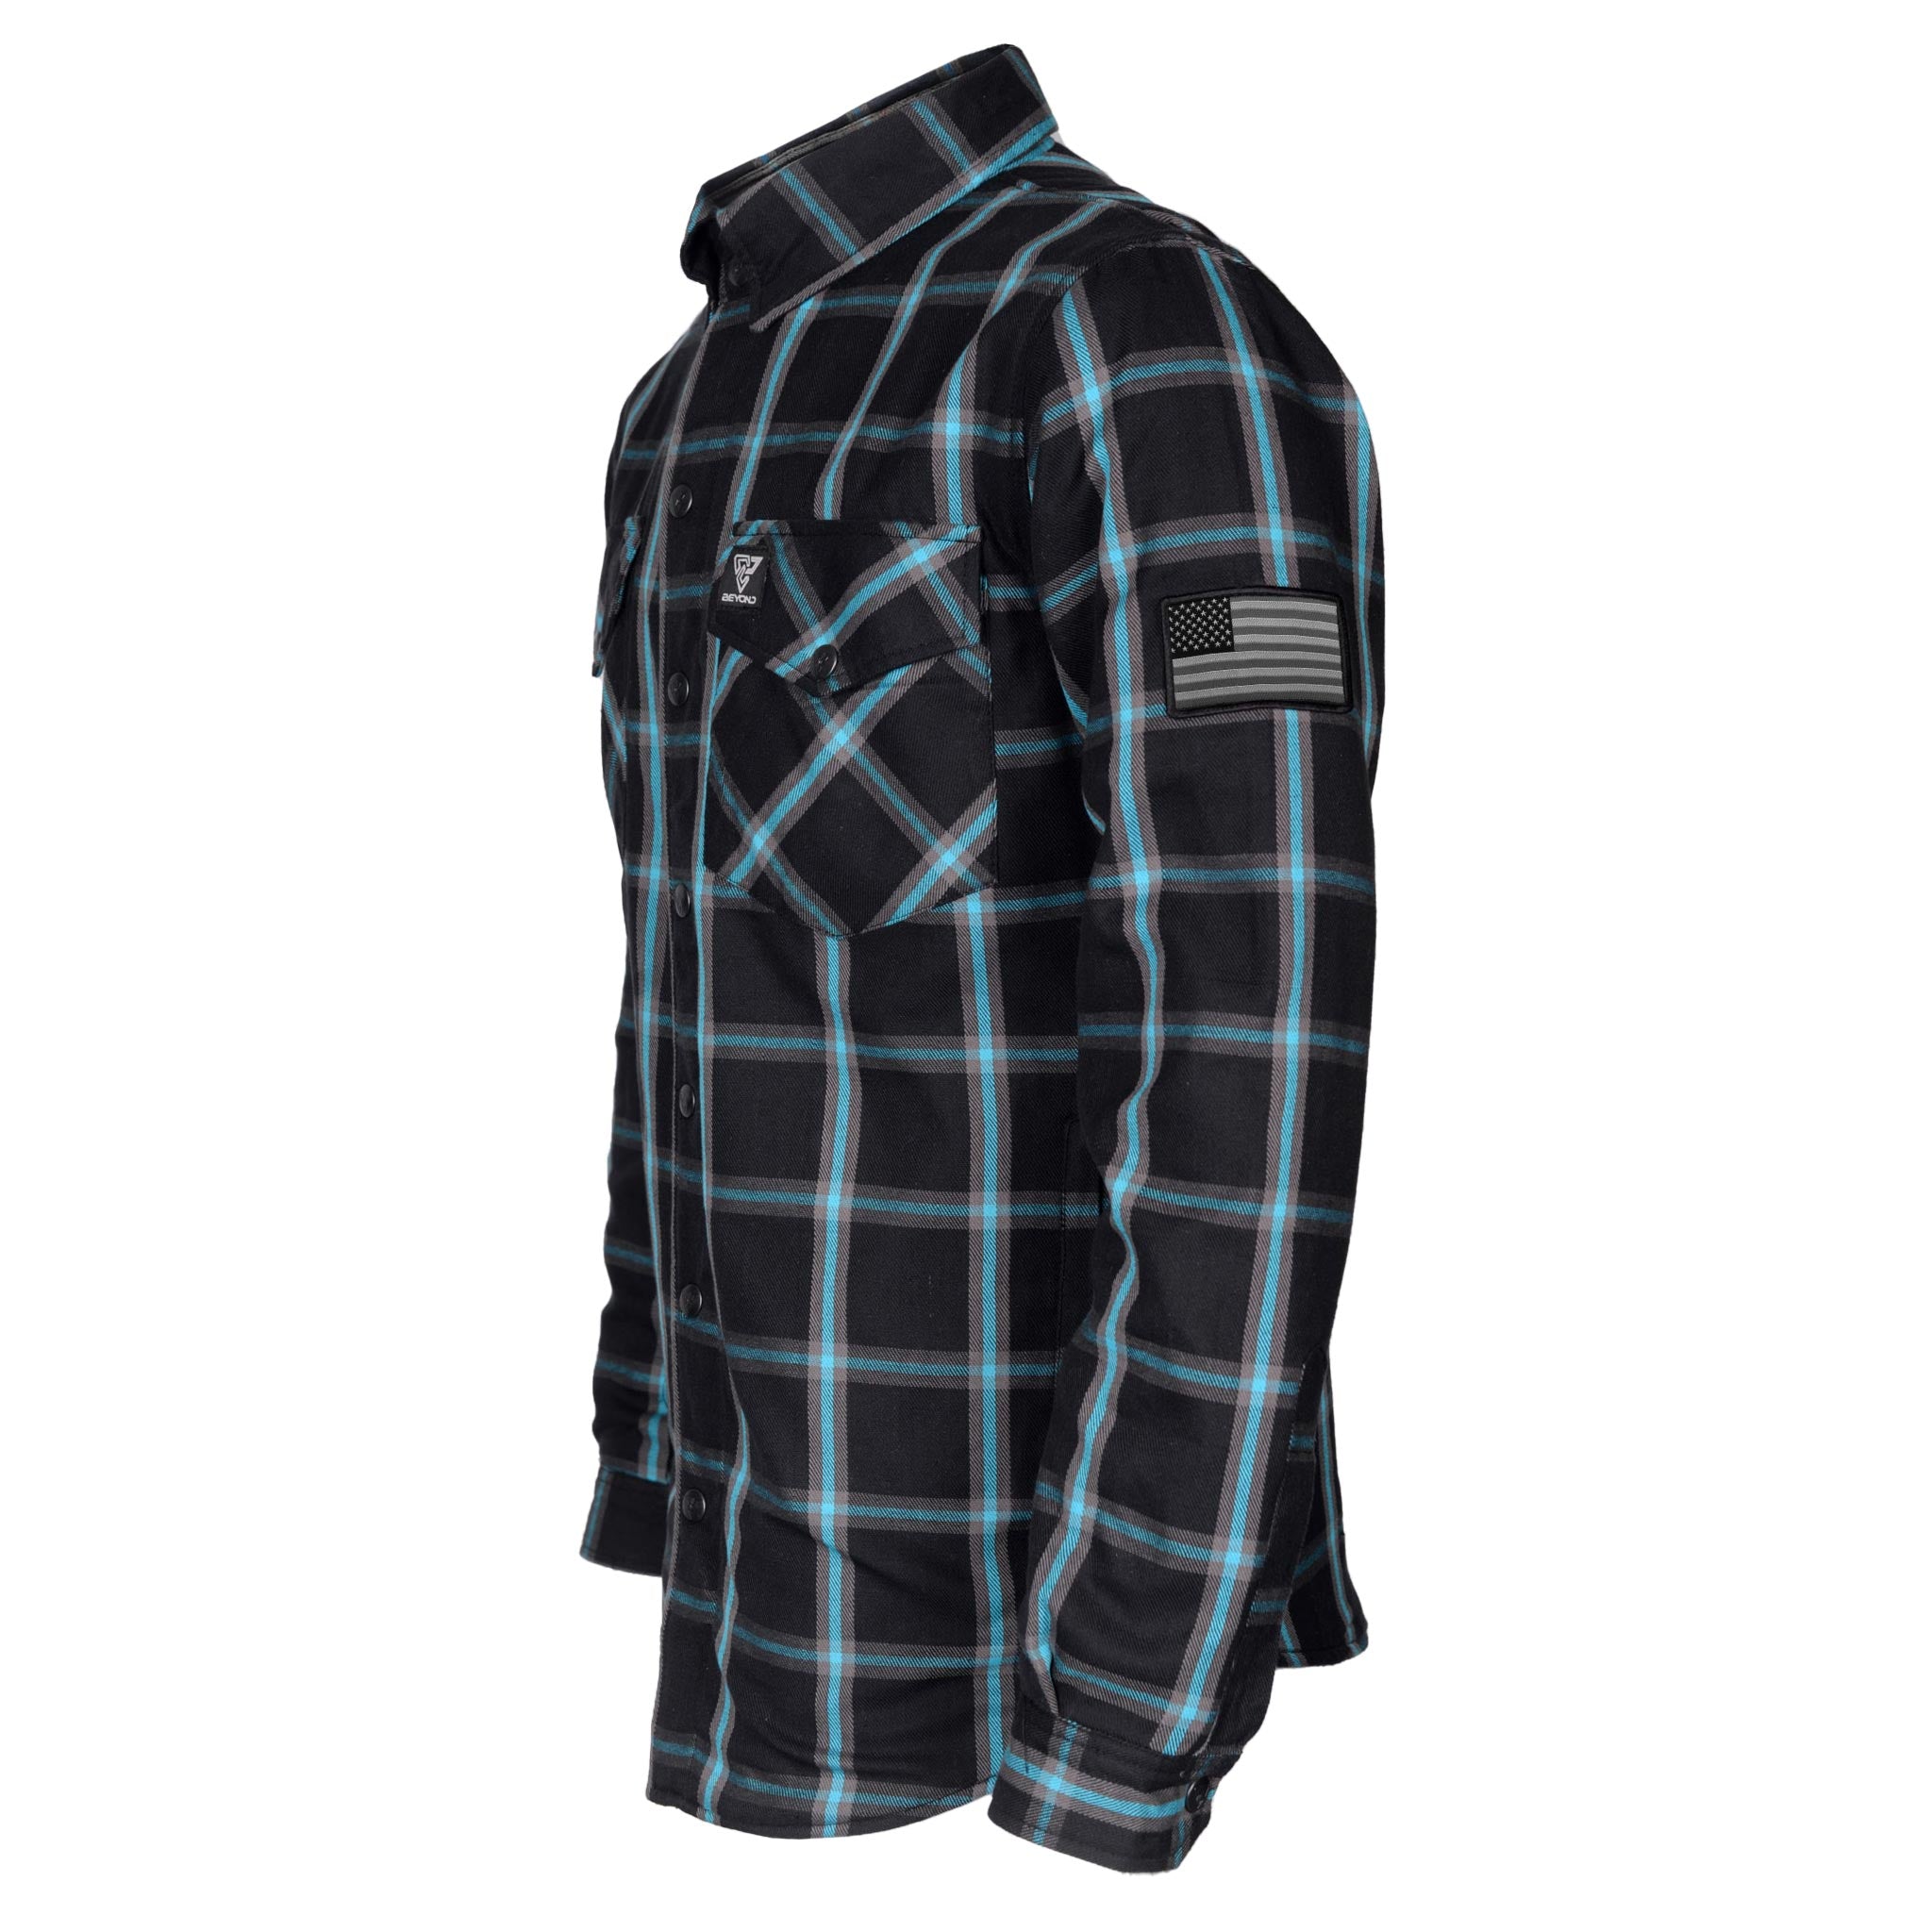 flannel-men's-shirt-in-black-checkered-blue-stipes-with-USA-flag-on-sleeve